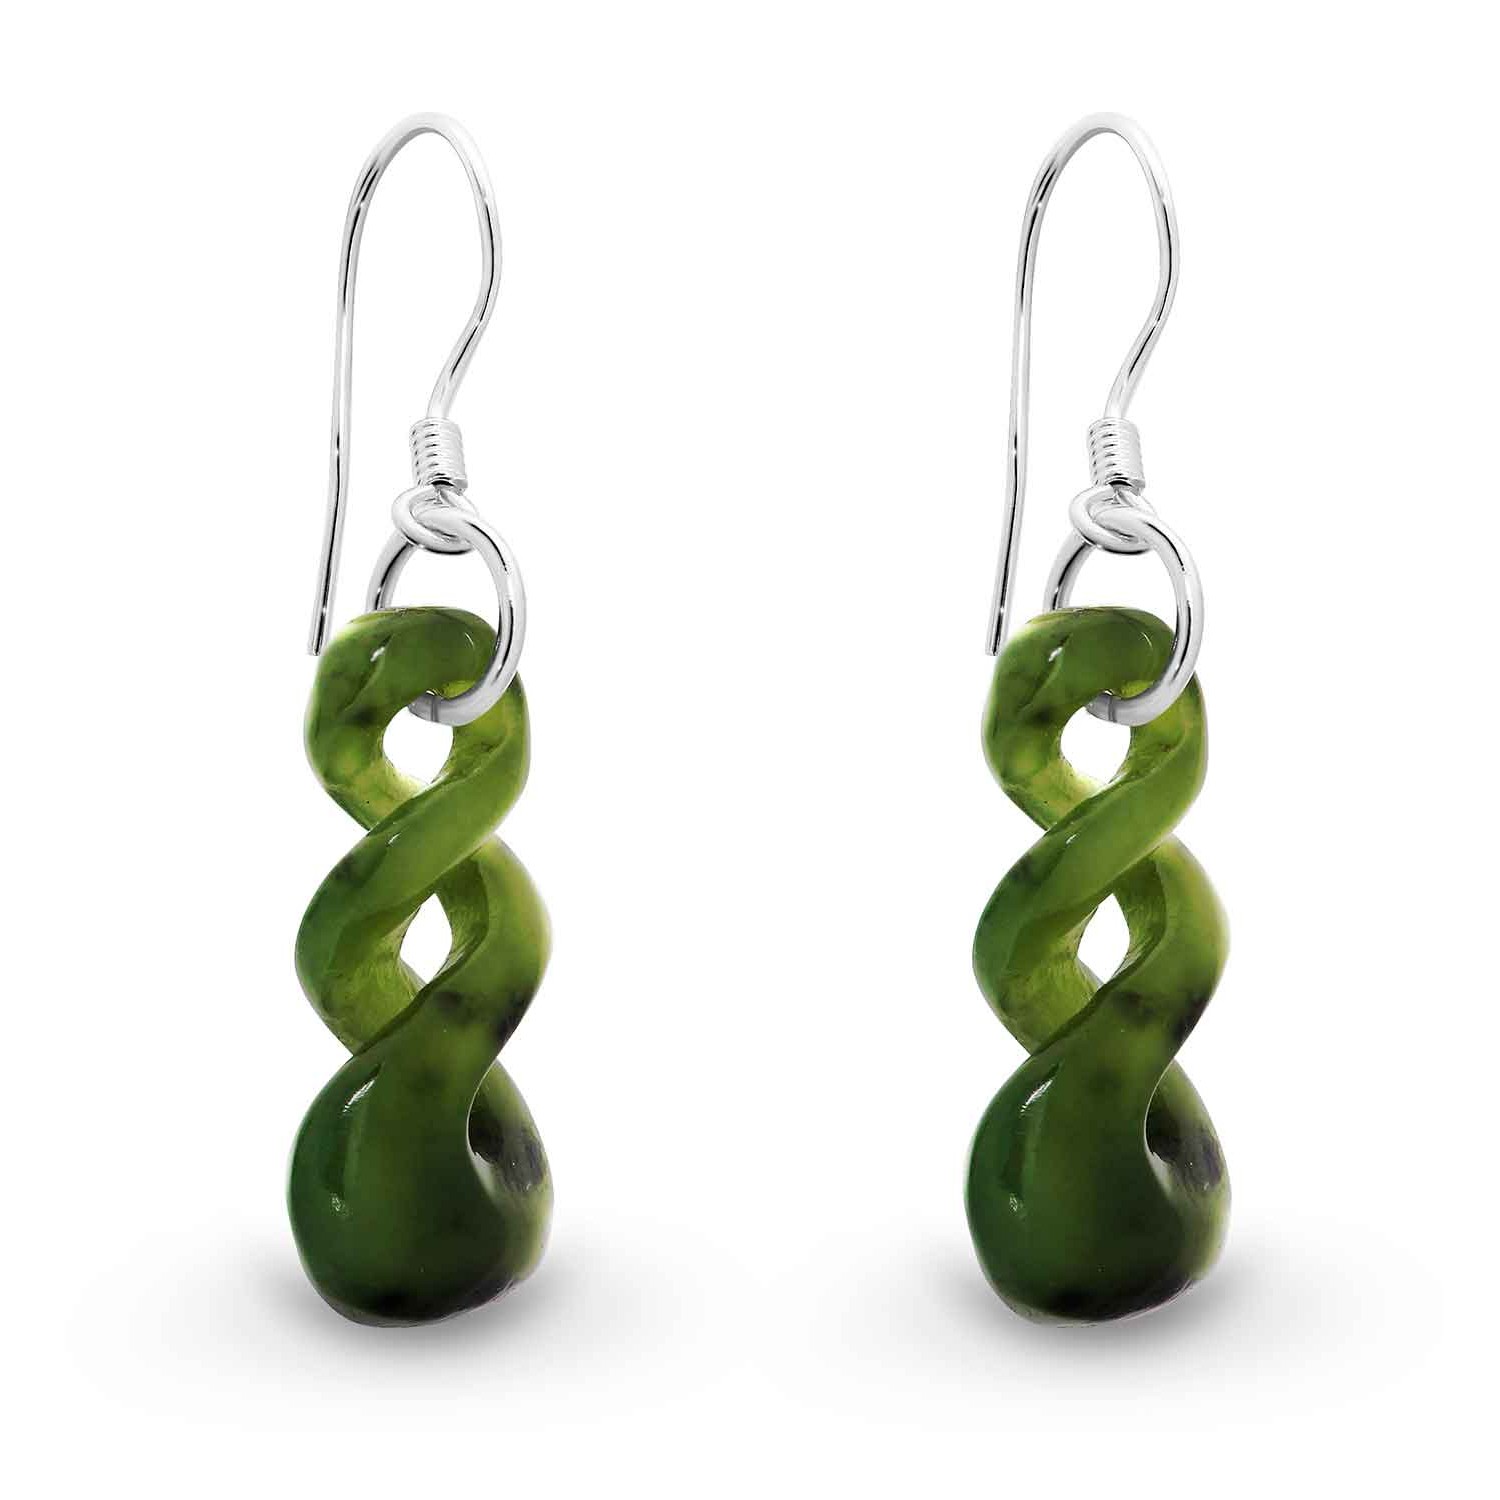 Pounamu Double Twist Infinity Earrings. NZ Pounamu or Greenstone earrings with sterling silver fittings  Carved in NZ Greenstone Sterling Silver hook fitting Gift Boxed 5 Year Written Guarantee Oxipay is simply the easier way to pay - use Oxipay and @chri